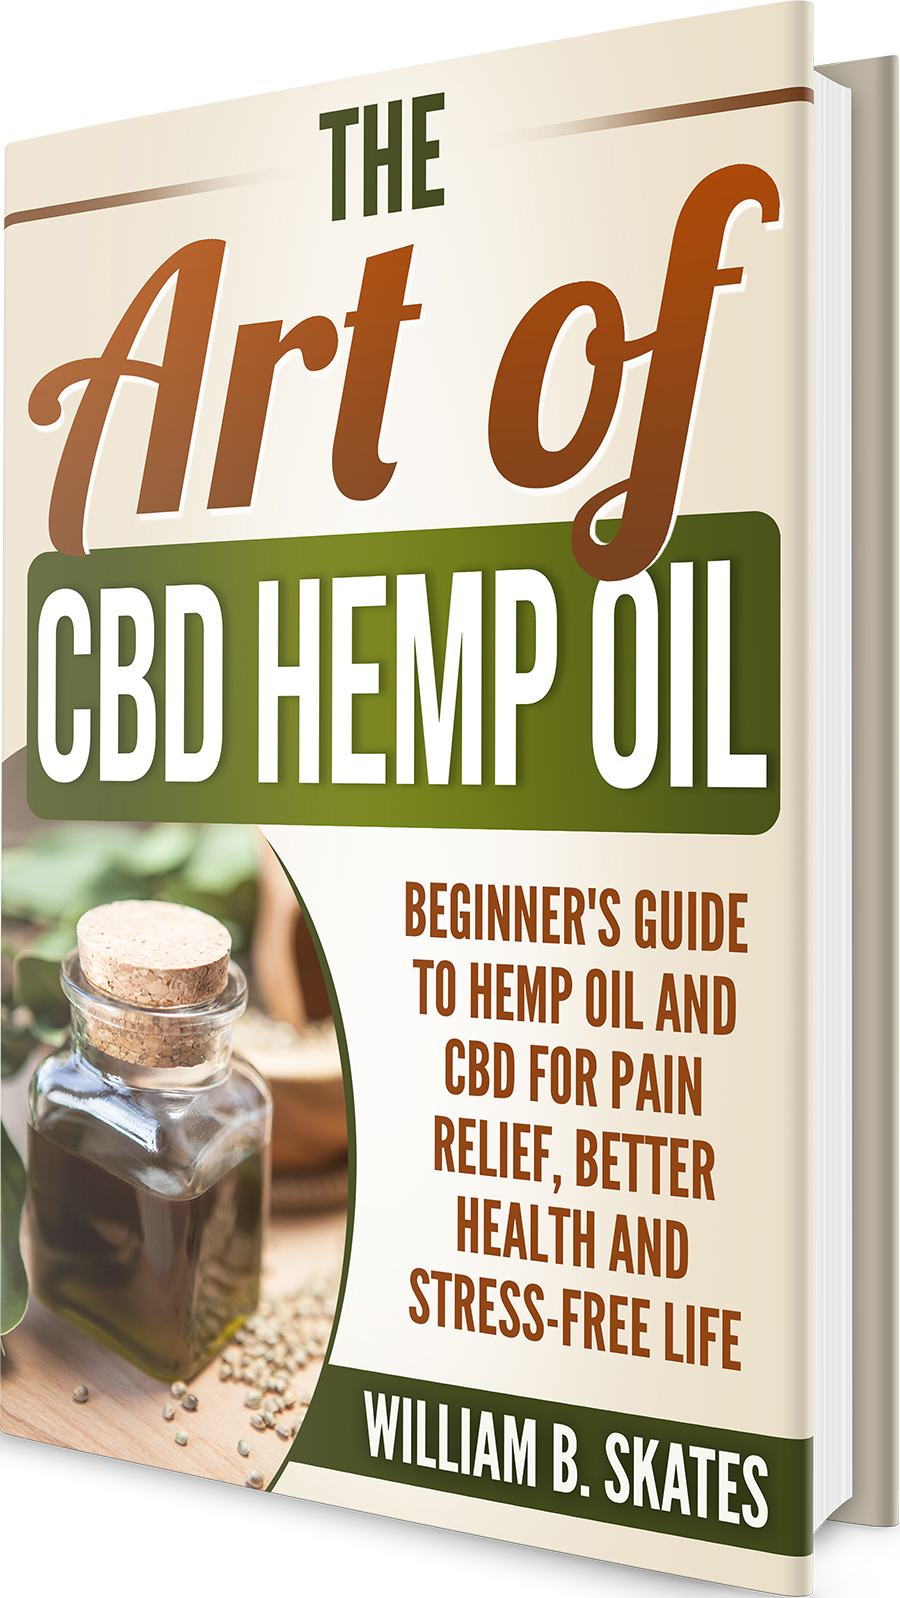 FREE: The Art of CBD Hemp Oil: The Complete Beginner’s Guide to CBD and Hemp Oil to Reduce Pain, Better Health and Fight Anxiety by William B. Skates